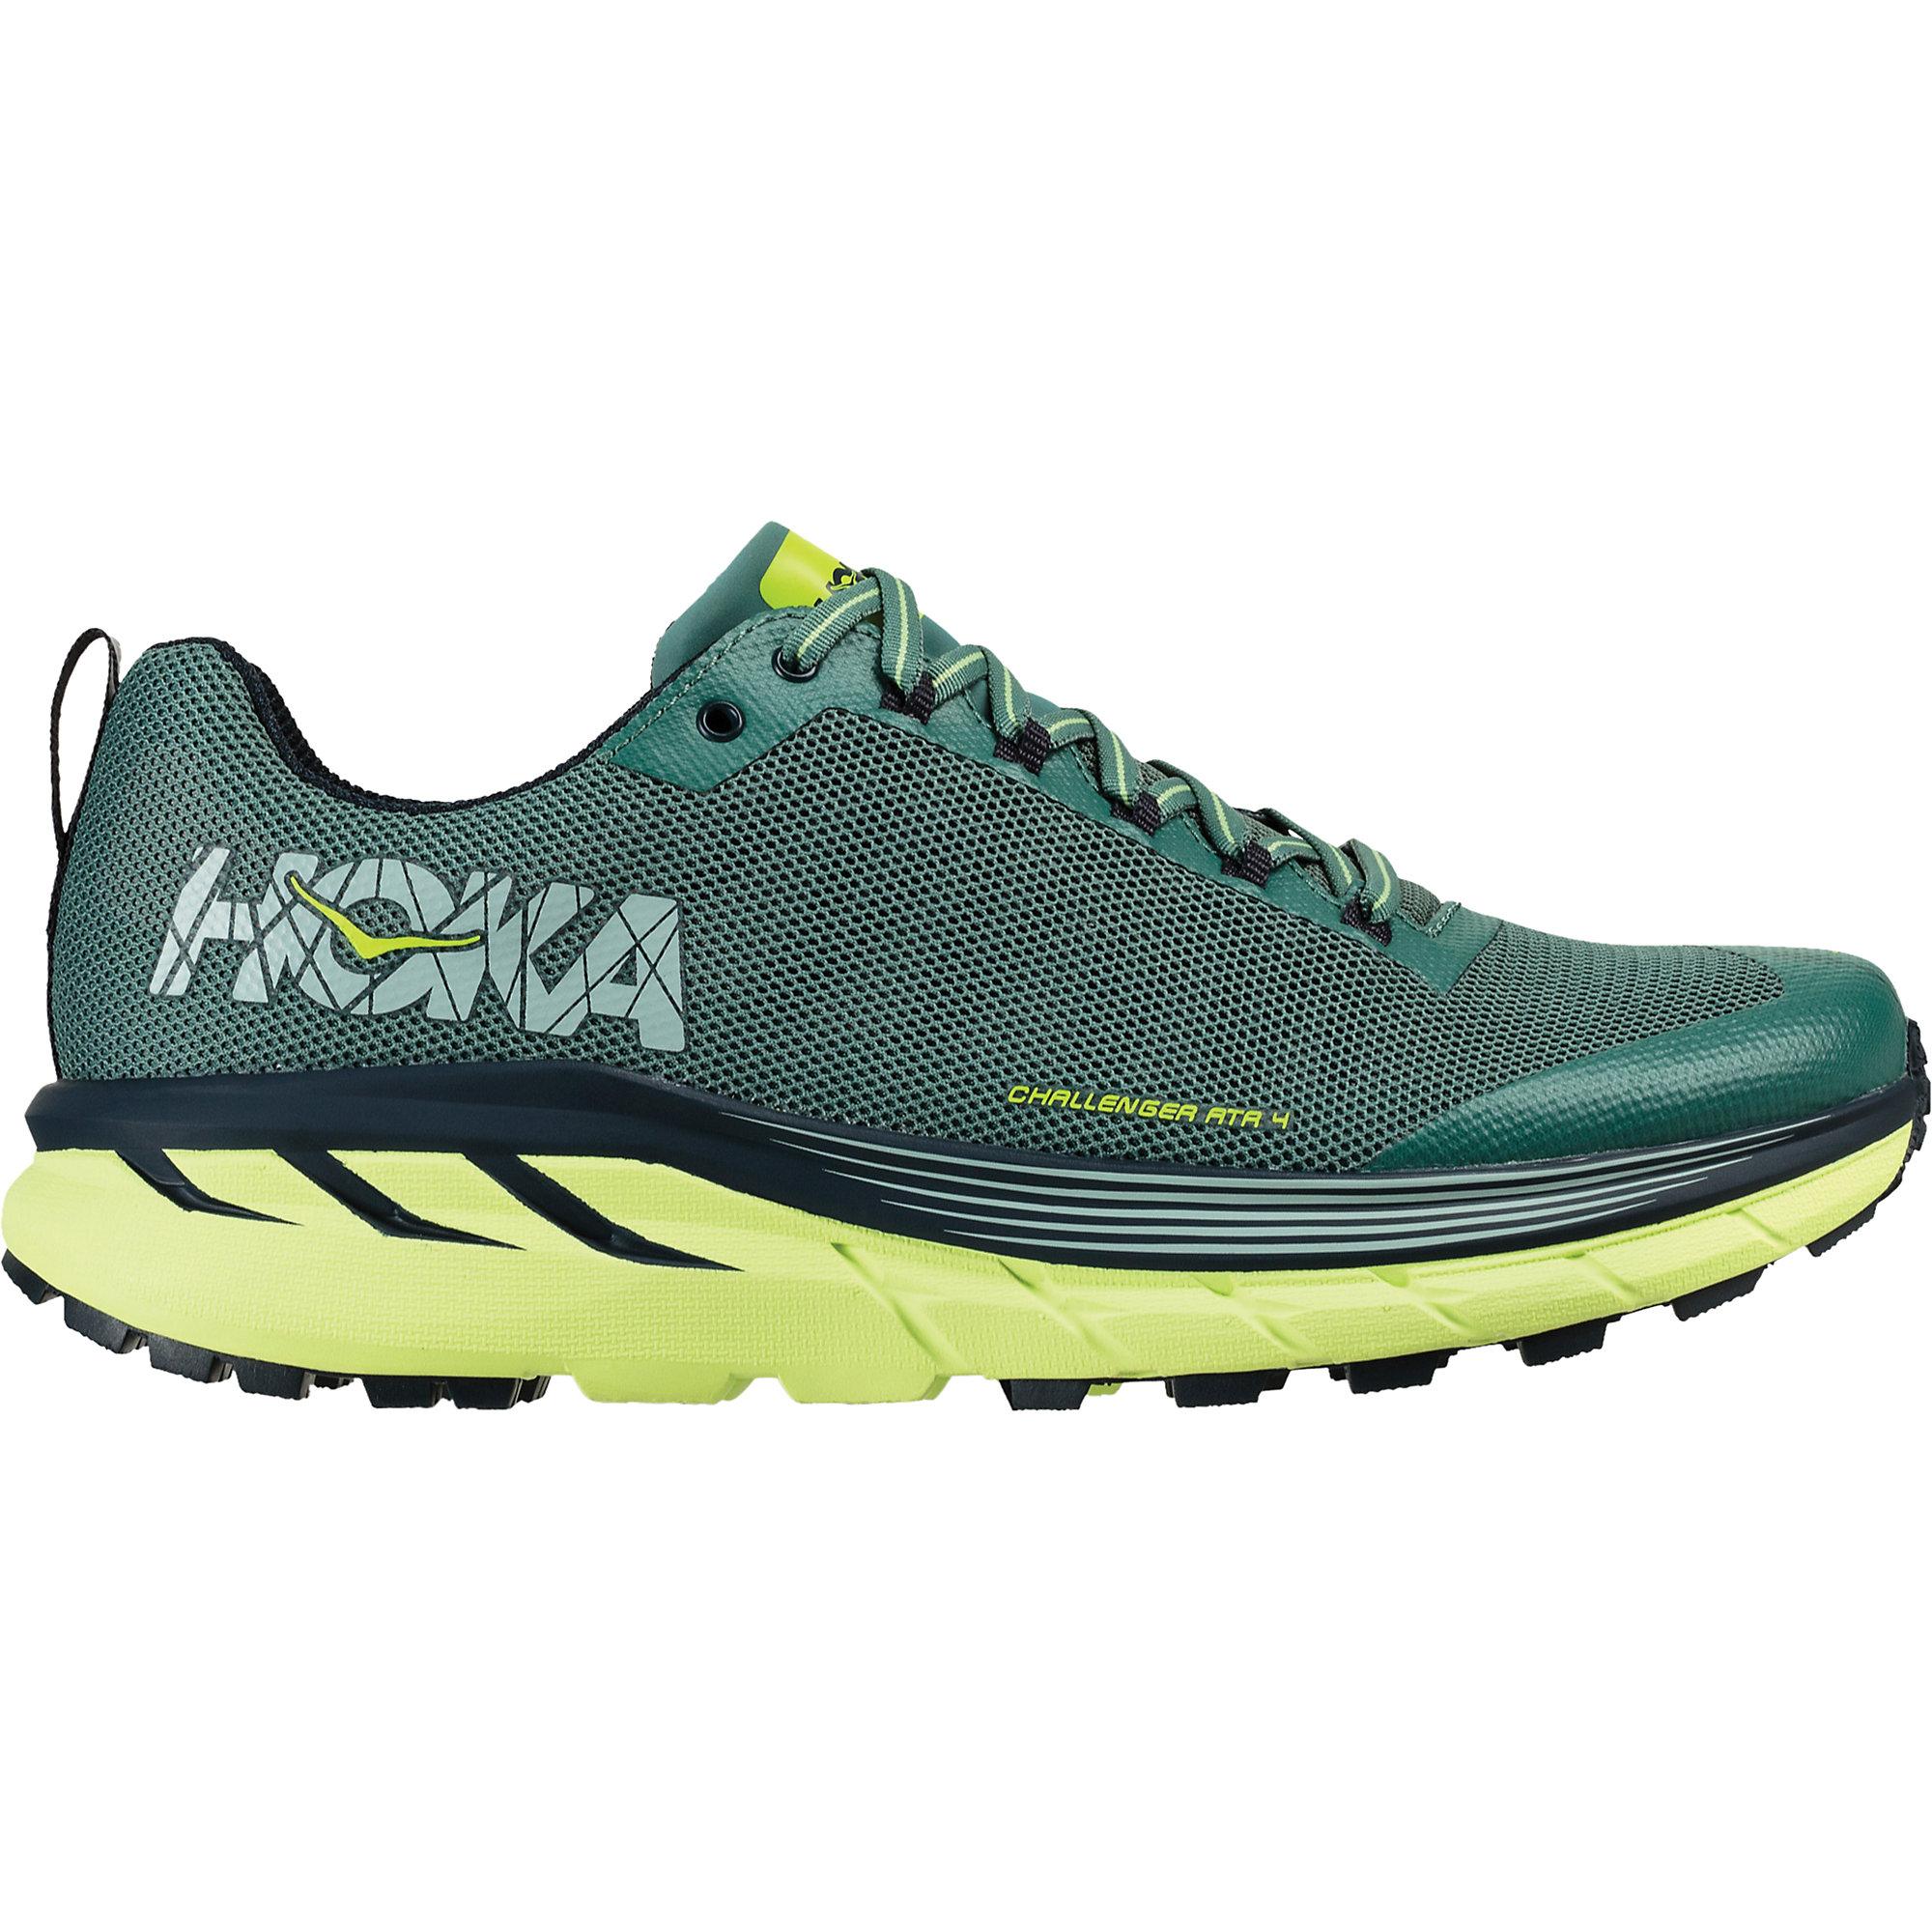 Hoka One One Challenger Atr 4 Shoe in Gray for Men - Lyst